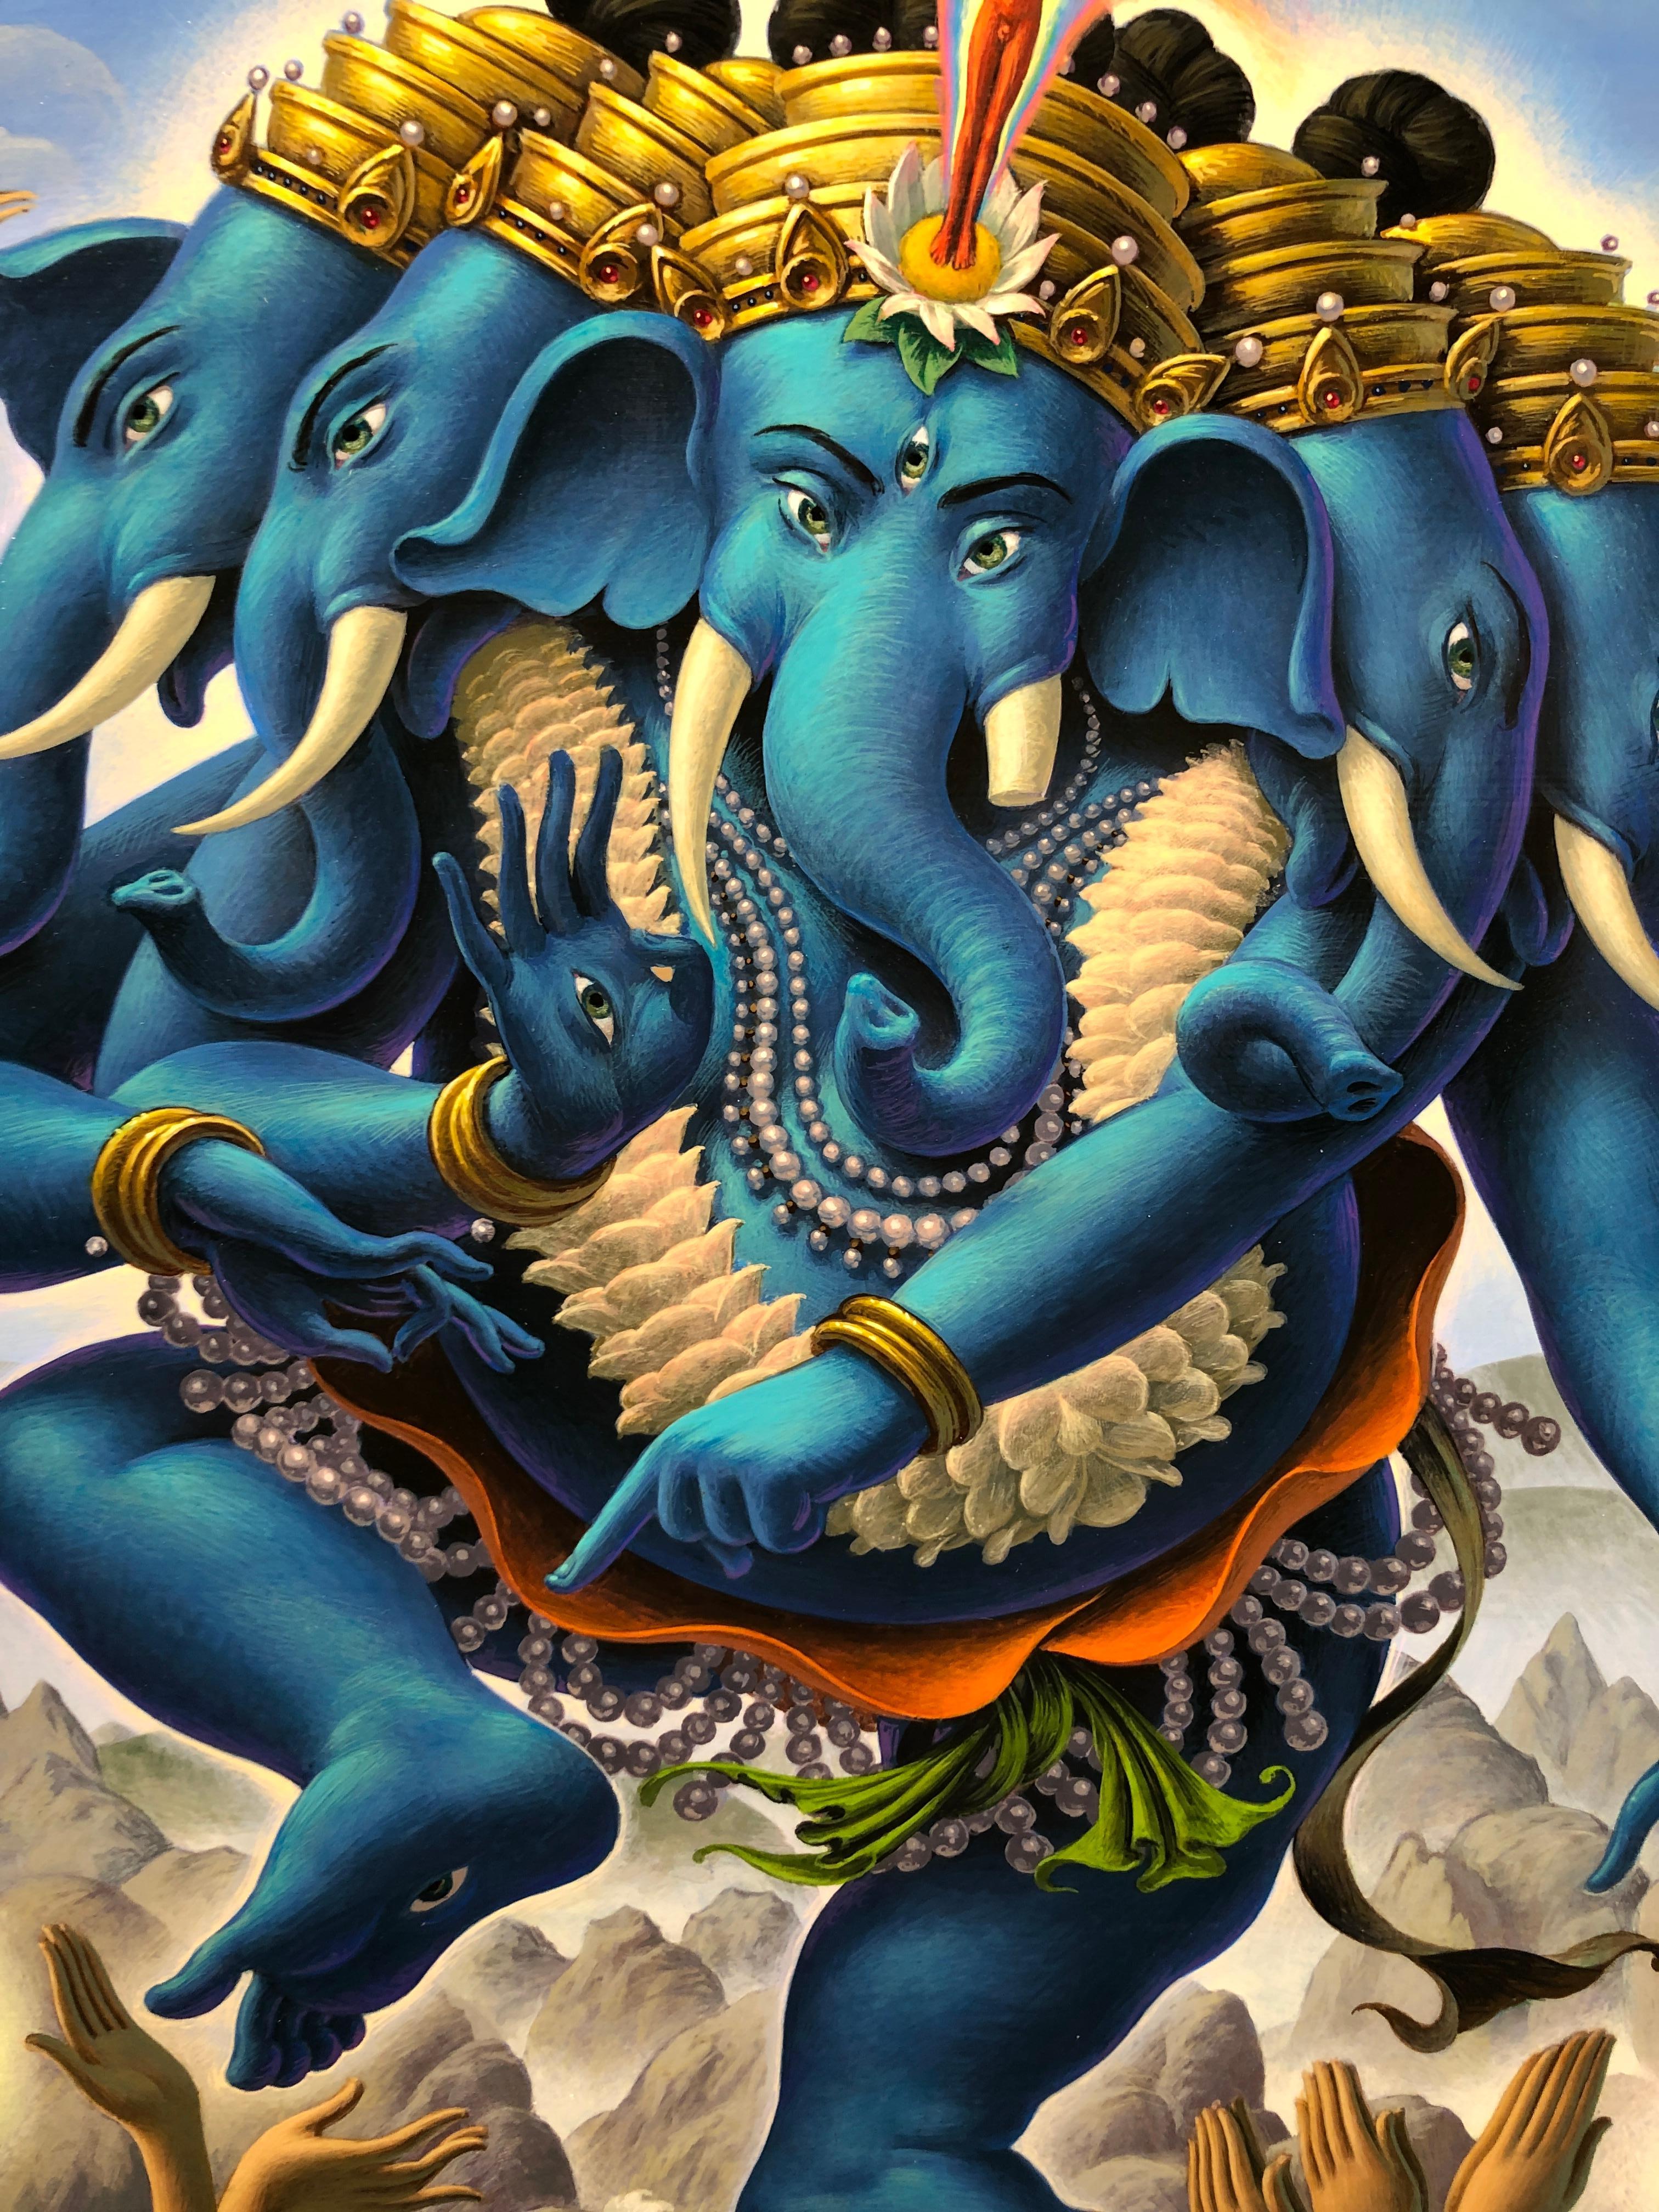 Ganesh at the Maelstrom - Highly Detailed Surreal, Symbolic Painting 11